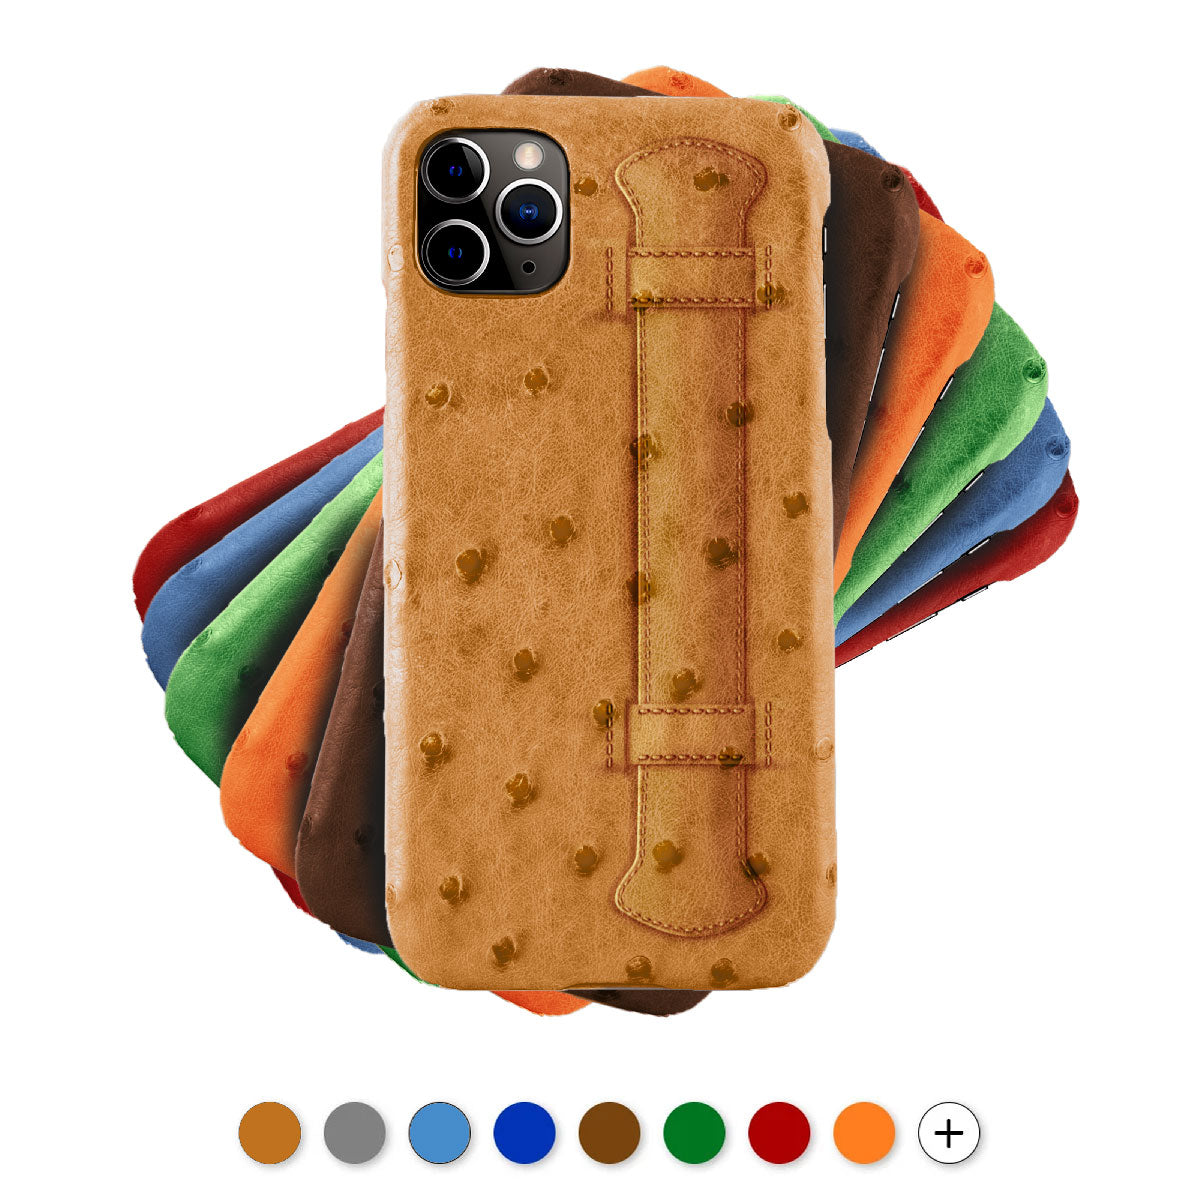 Leather iPhone " Strap case " with handle - iPhone 12 & 11 ( Pro / Max / Mini ) - Ostrich leather , brown , orange , blue , grey...